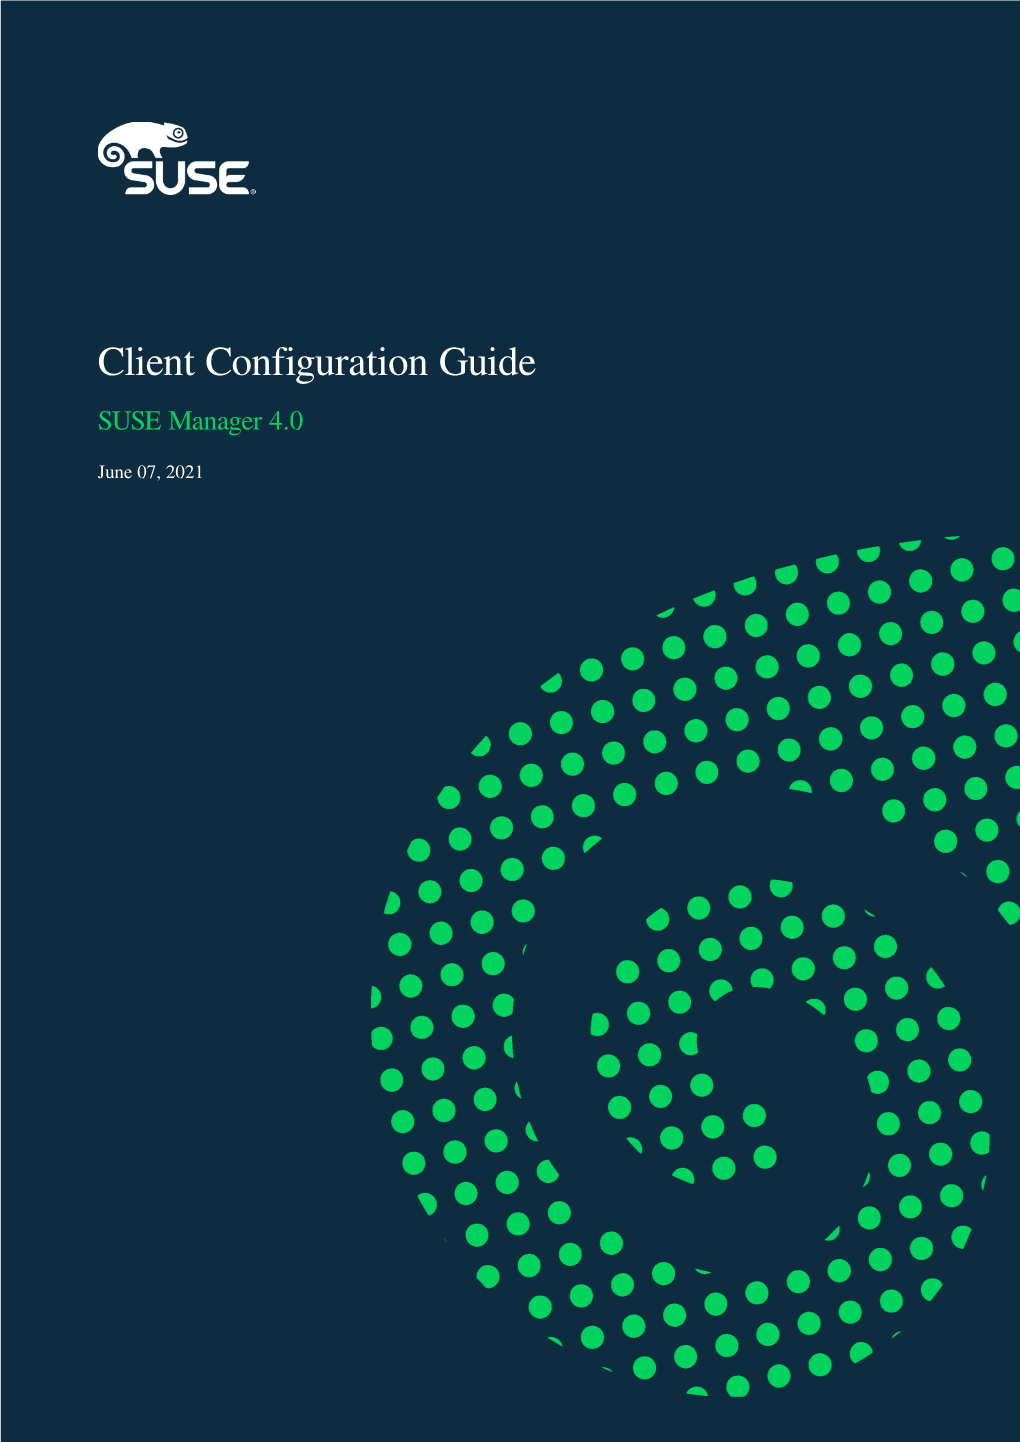 Client Configuration Guide: SUSE Manager